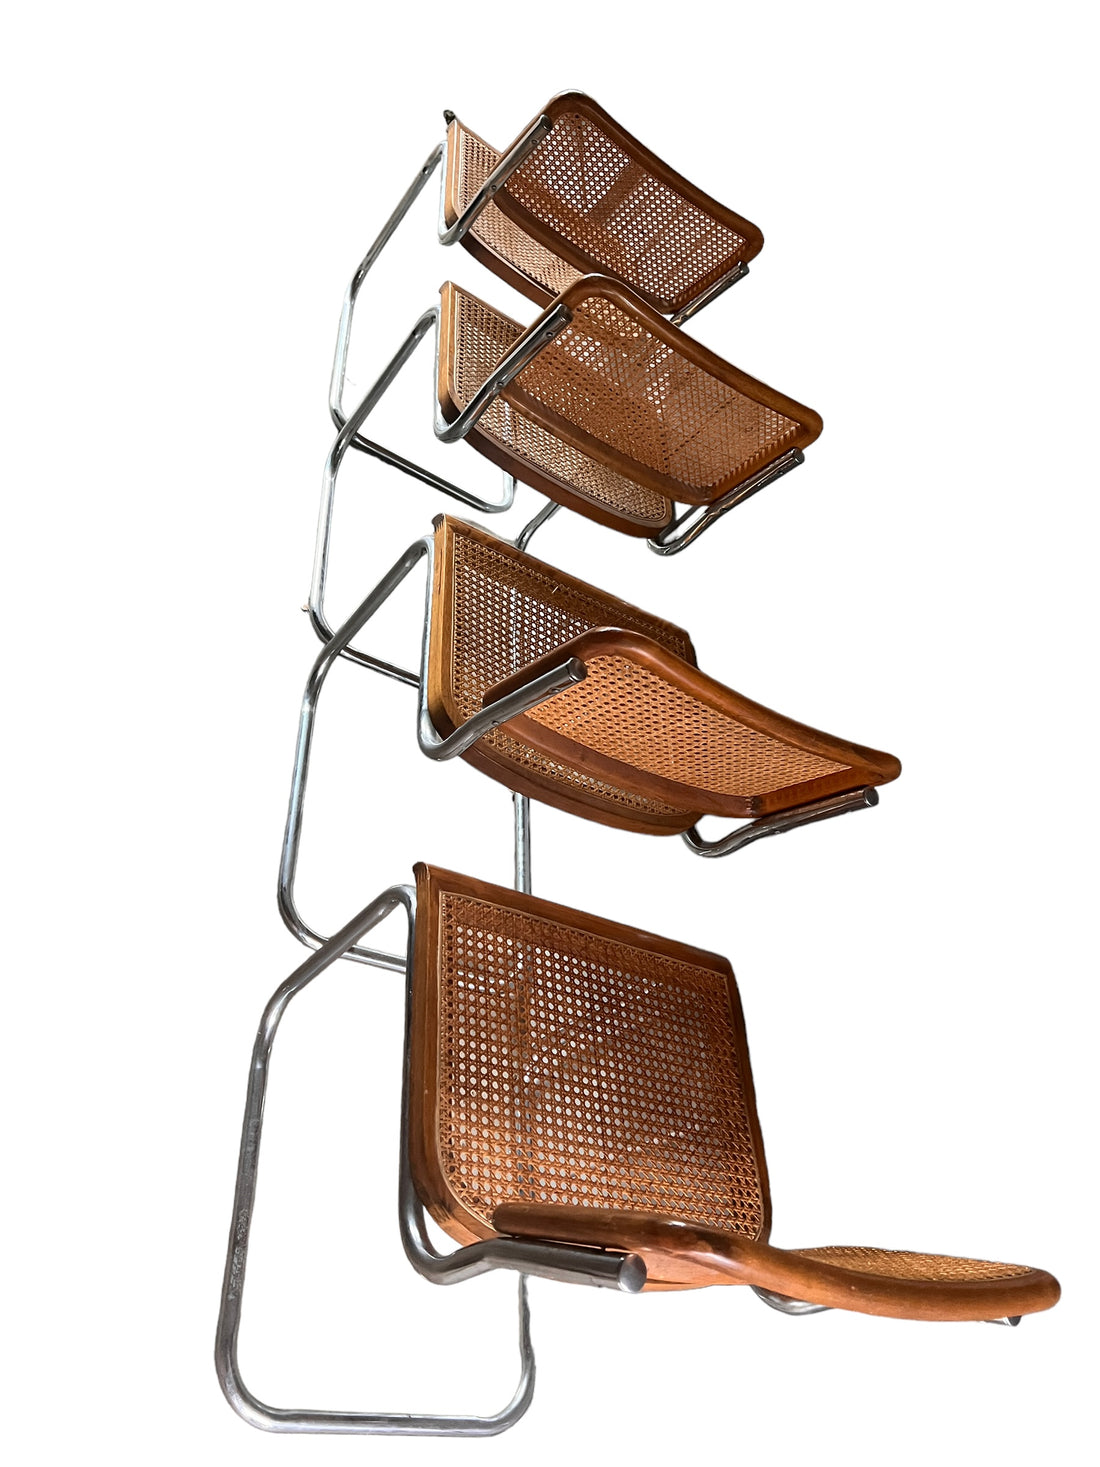 Vintage Marcel Breuer Chairs with Mixed Wood Tones 